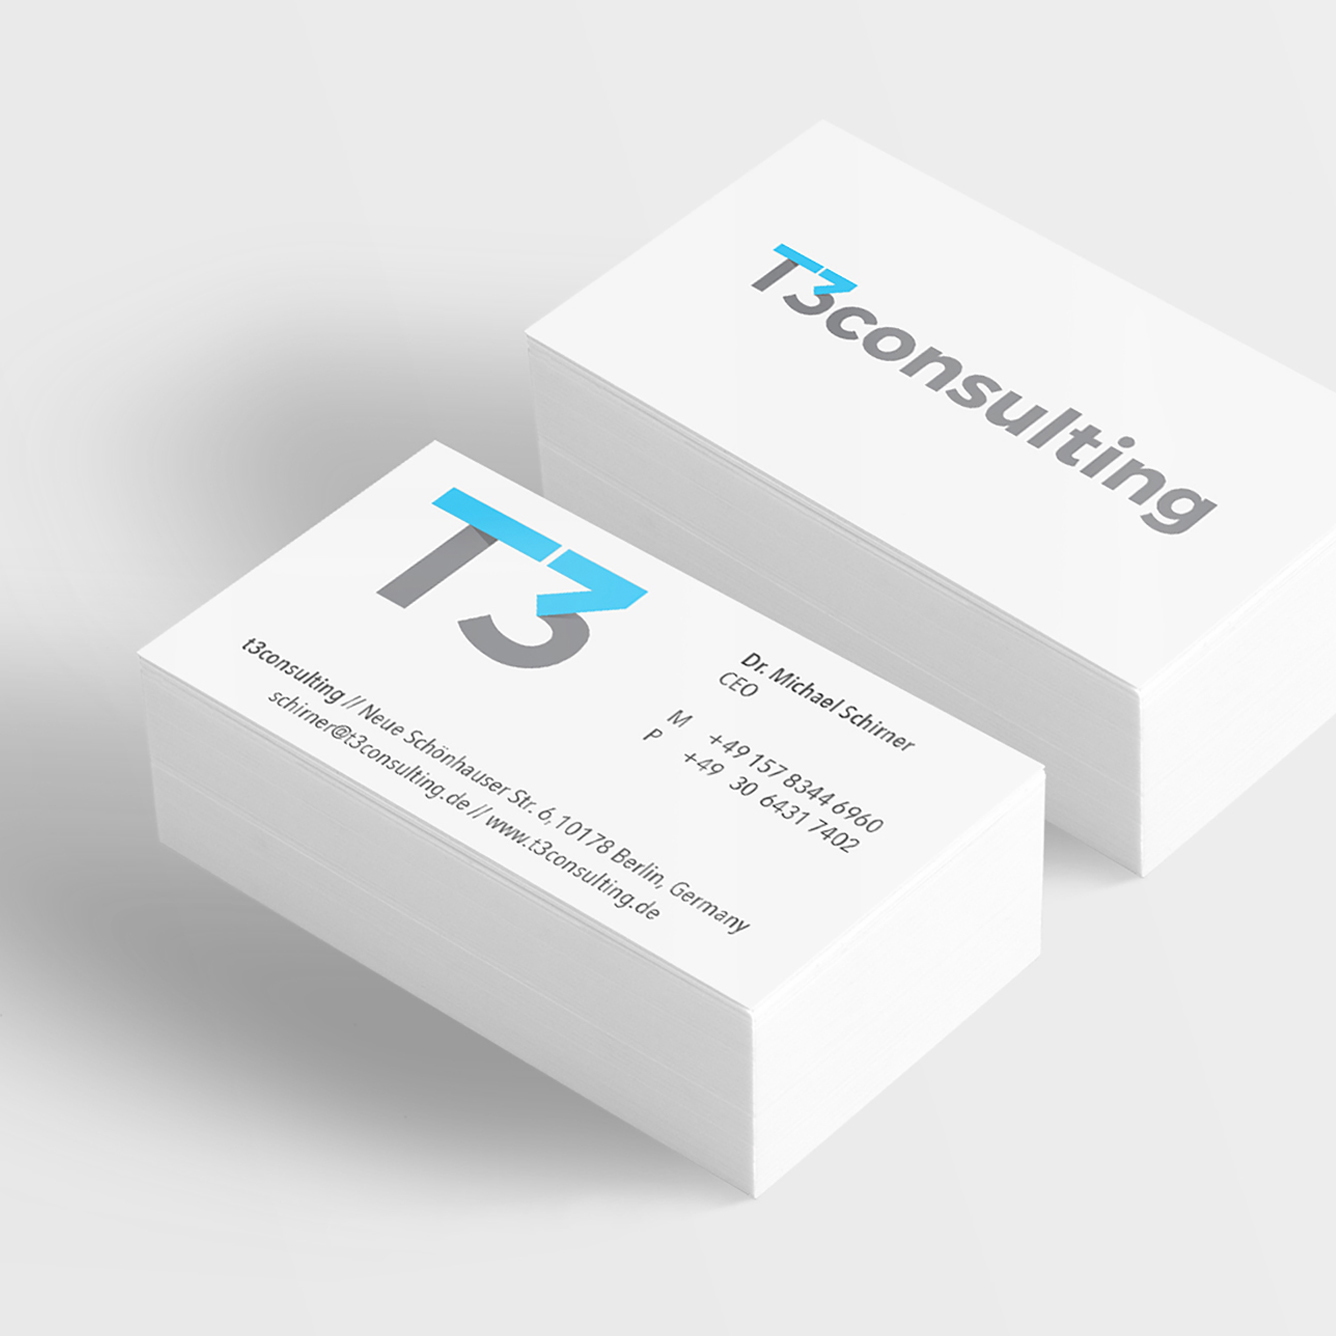 t3 Consulting